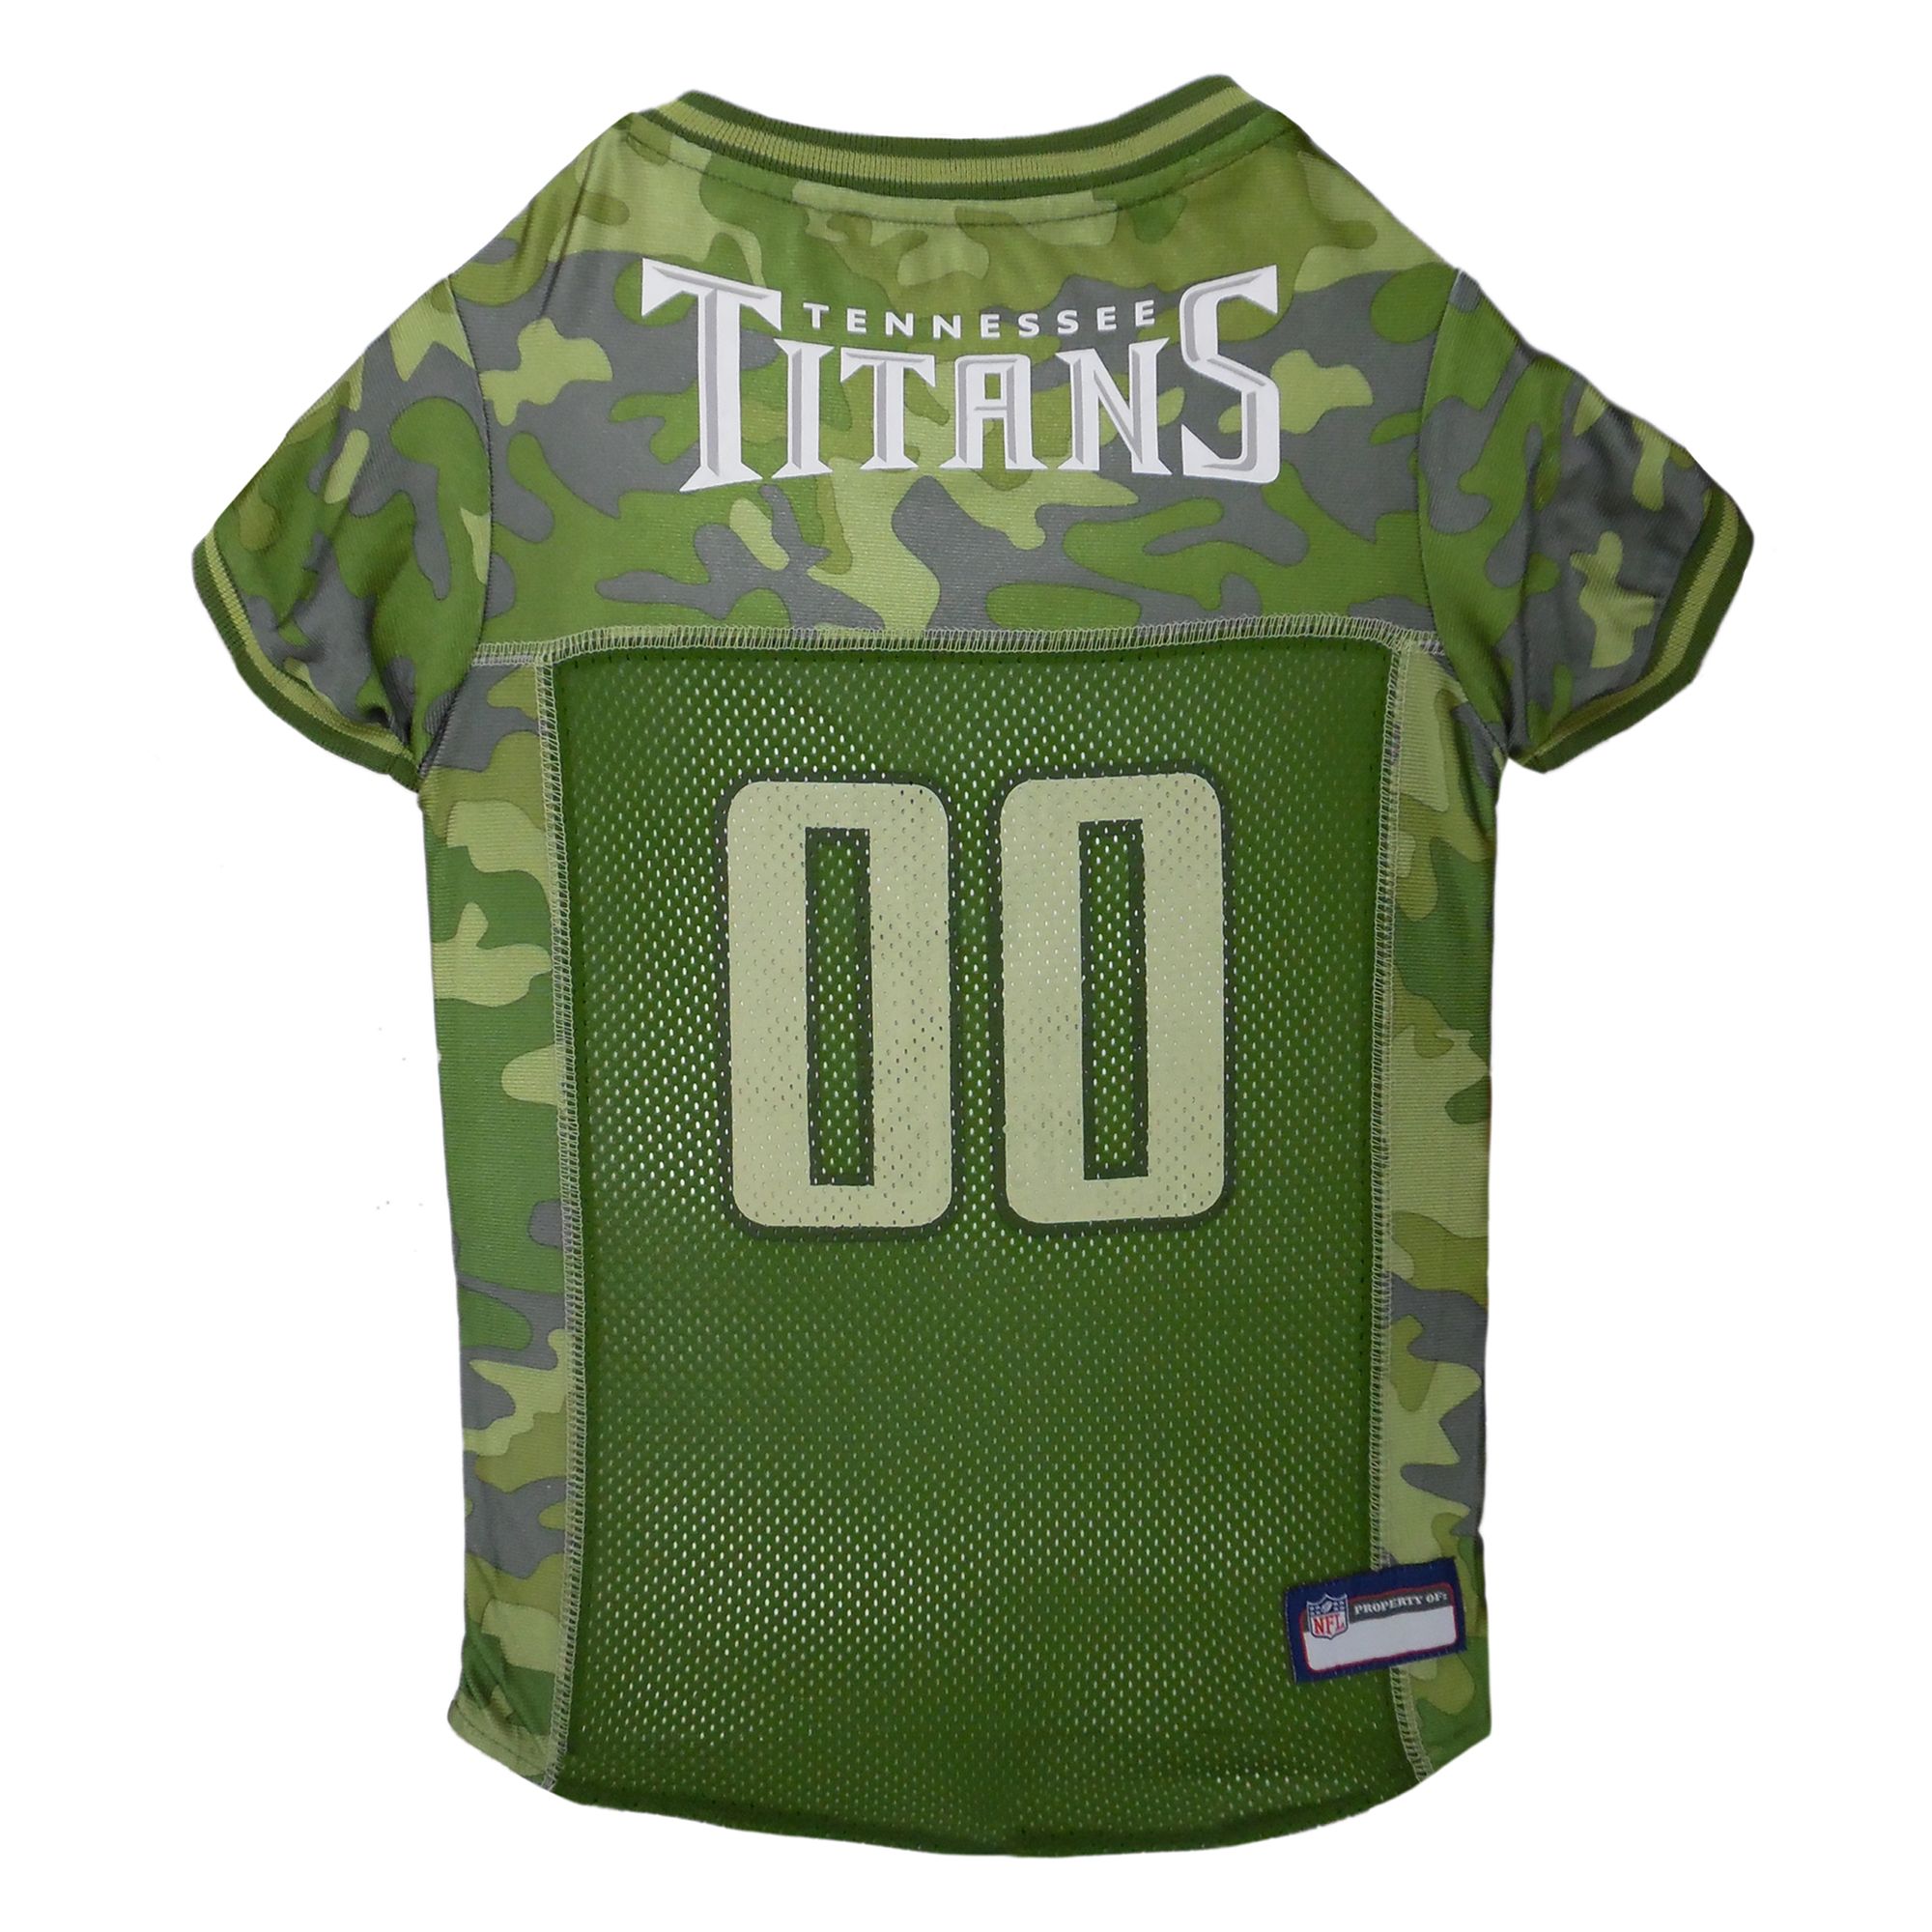 tennessee titans dog jersey